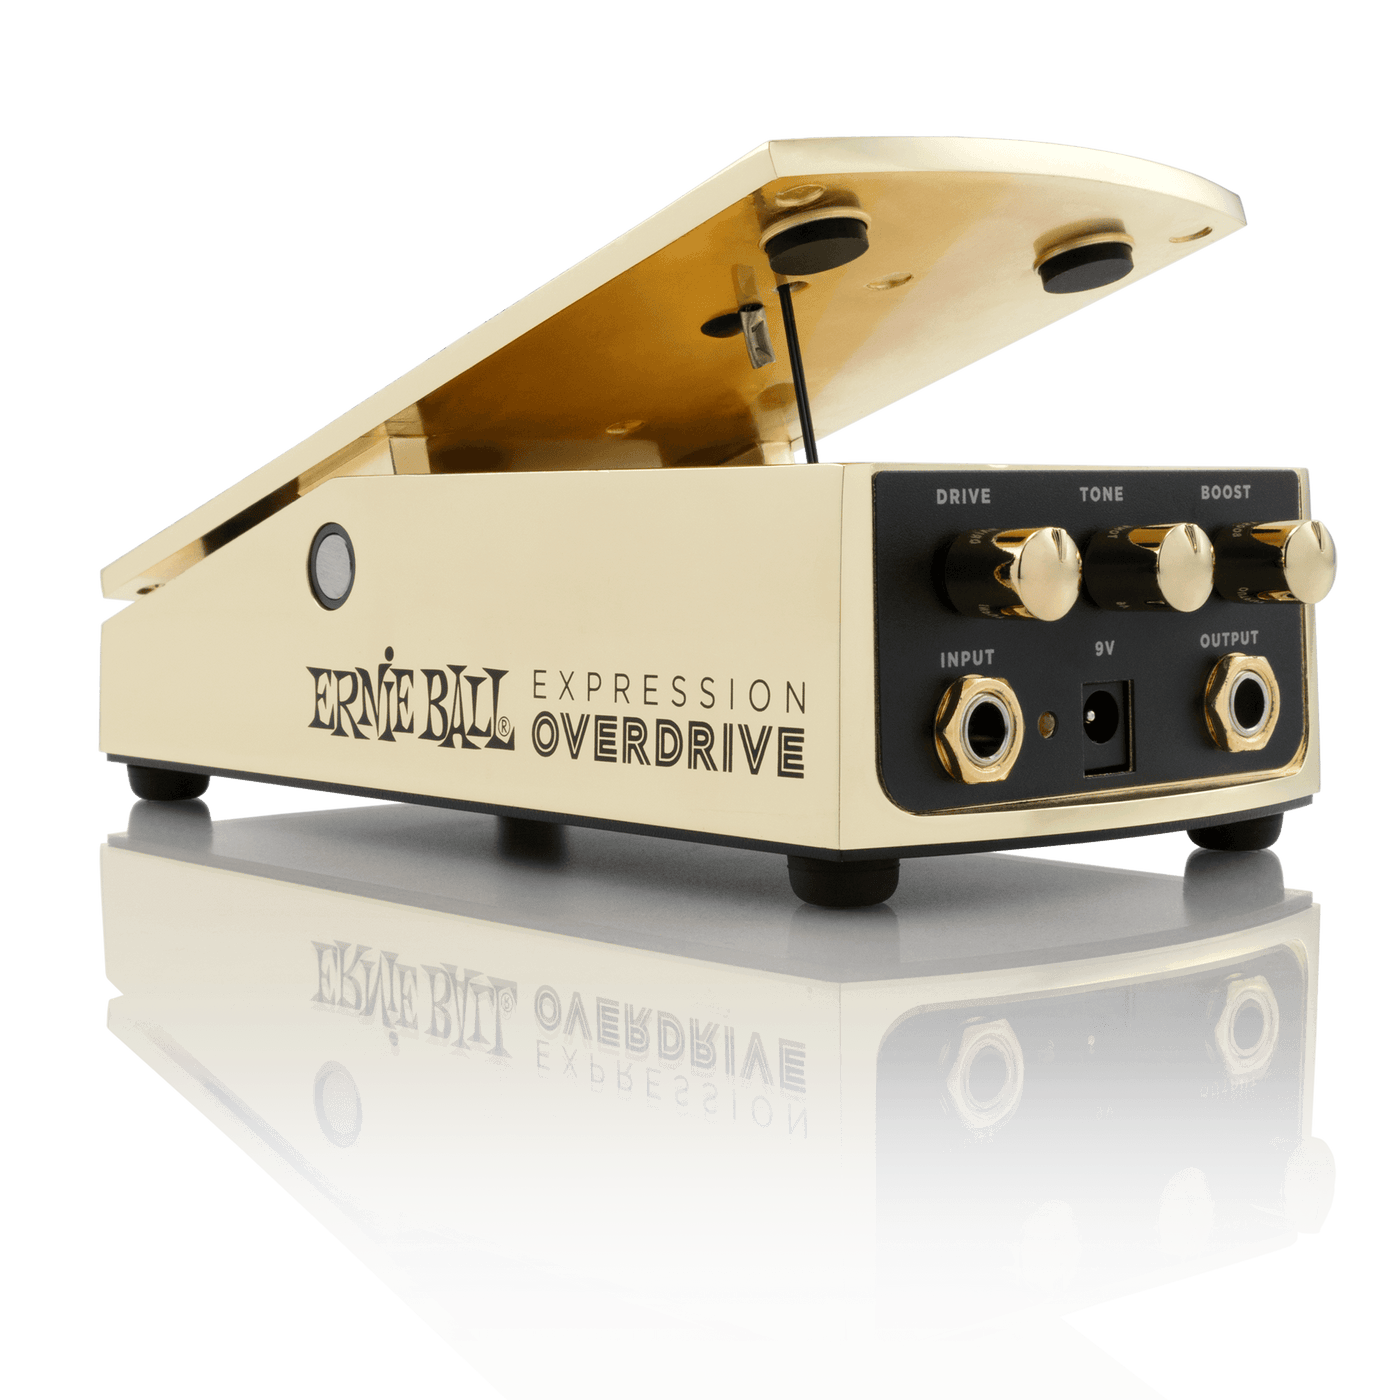 ERNIE BALL 6183 PEDAL EXPRESSION OVERDRIVE